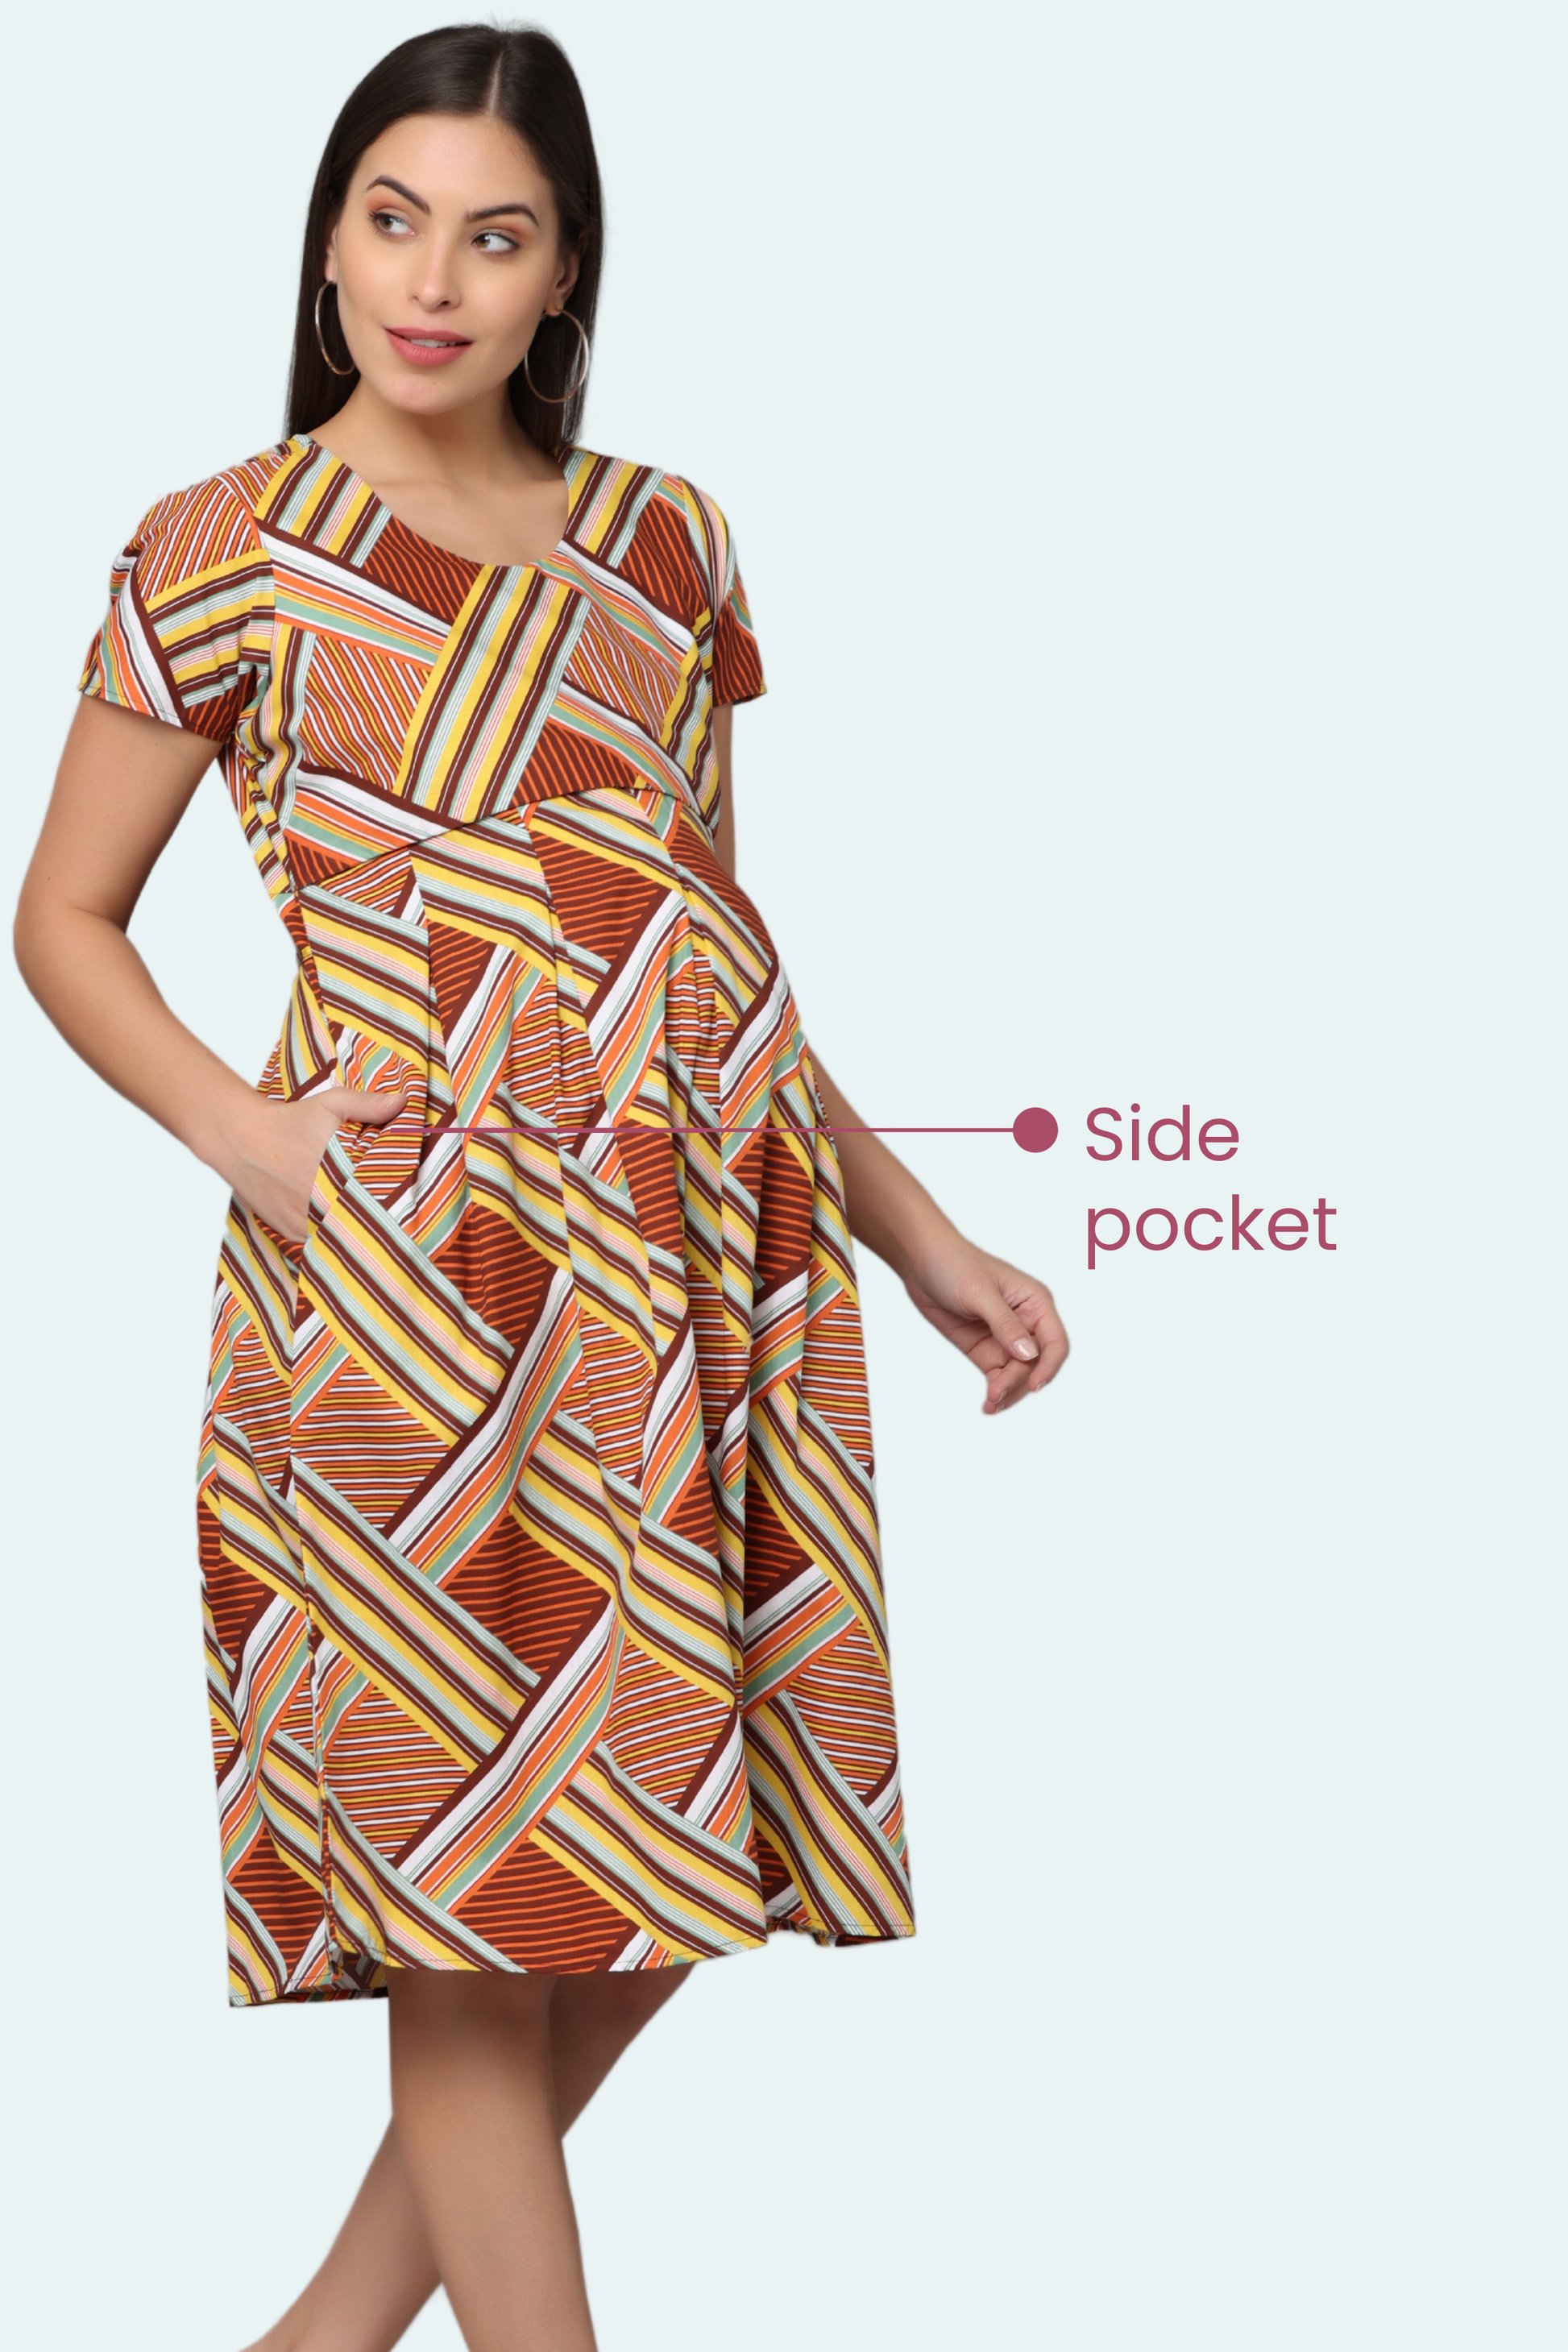 Feeding Dress With Front Tie To Adjust Fit